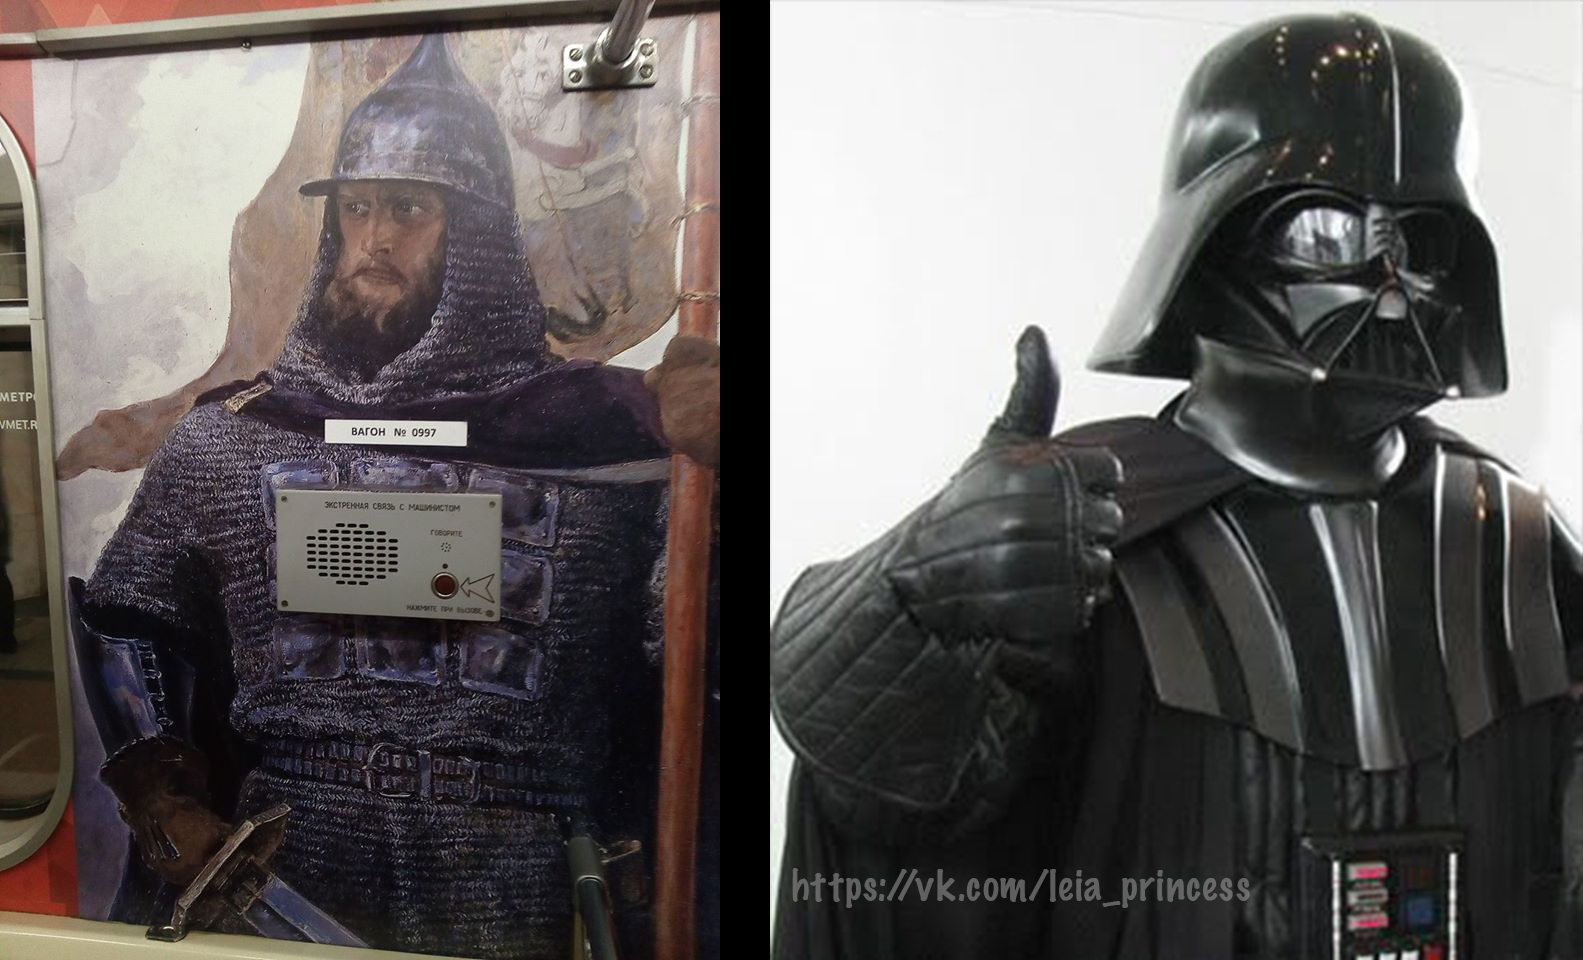 Prince Alexander Nevsky and the button to call the driver in the subway - Star Wars, Darth vader, Metro, Prince, Button, Prince Alexander Nevsky